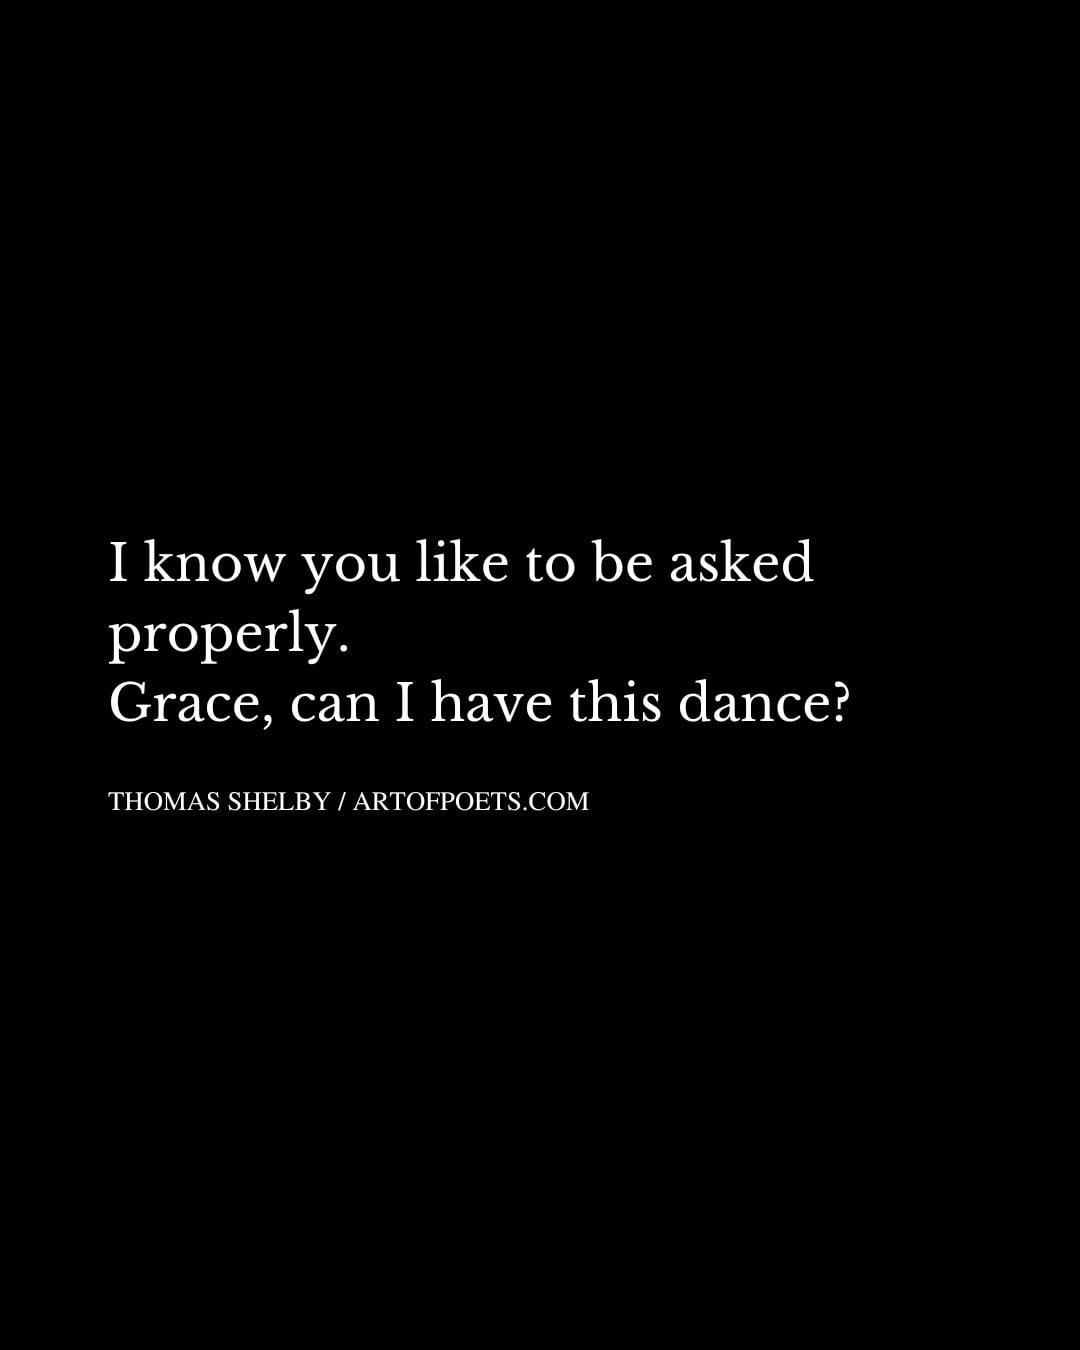 I know you like to be asked properly. Grace can I have this dance